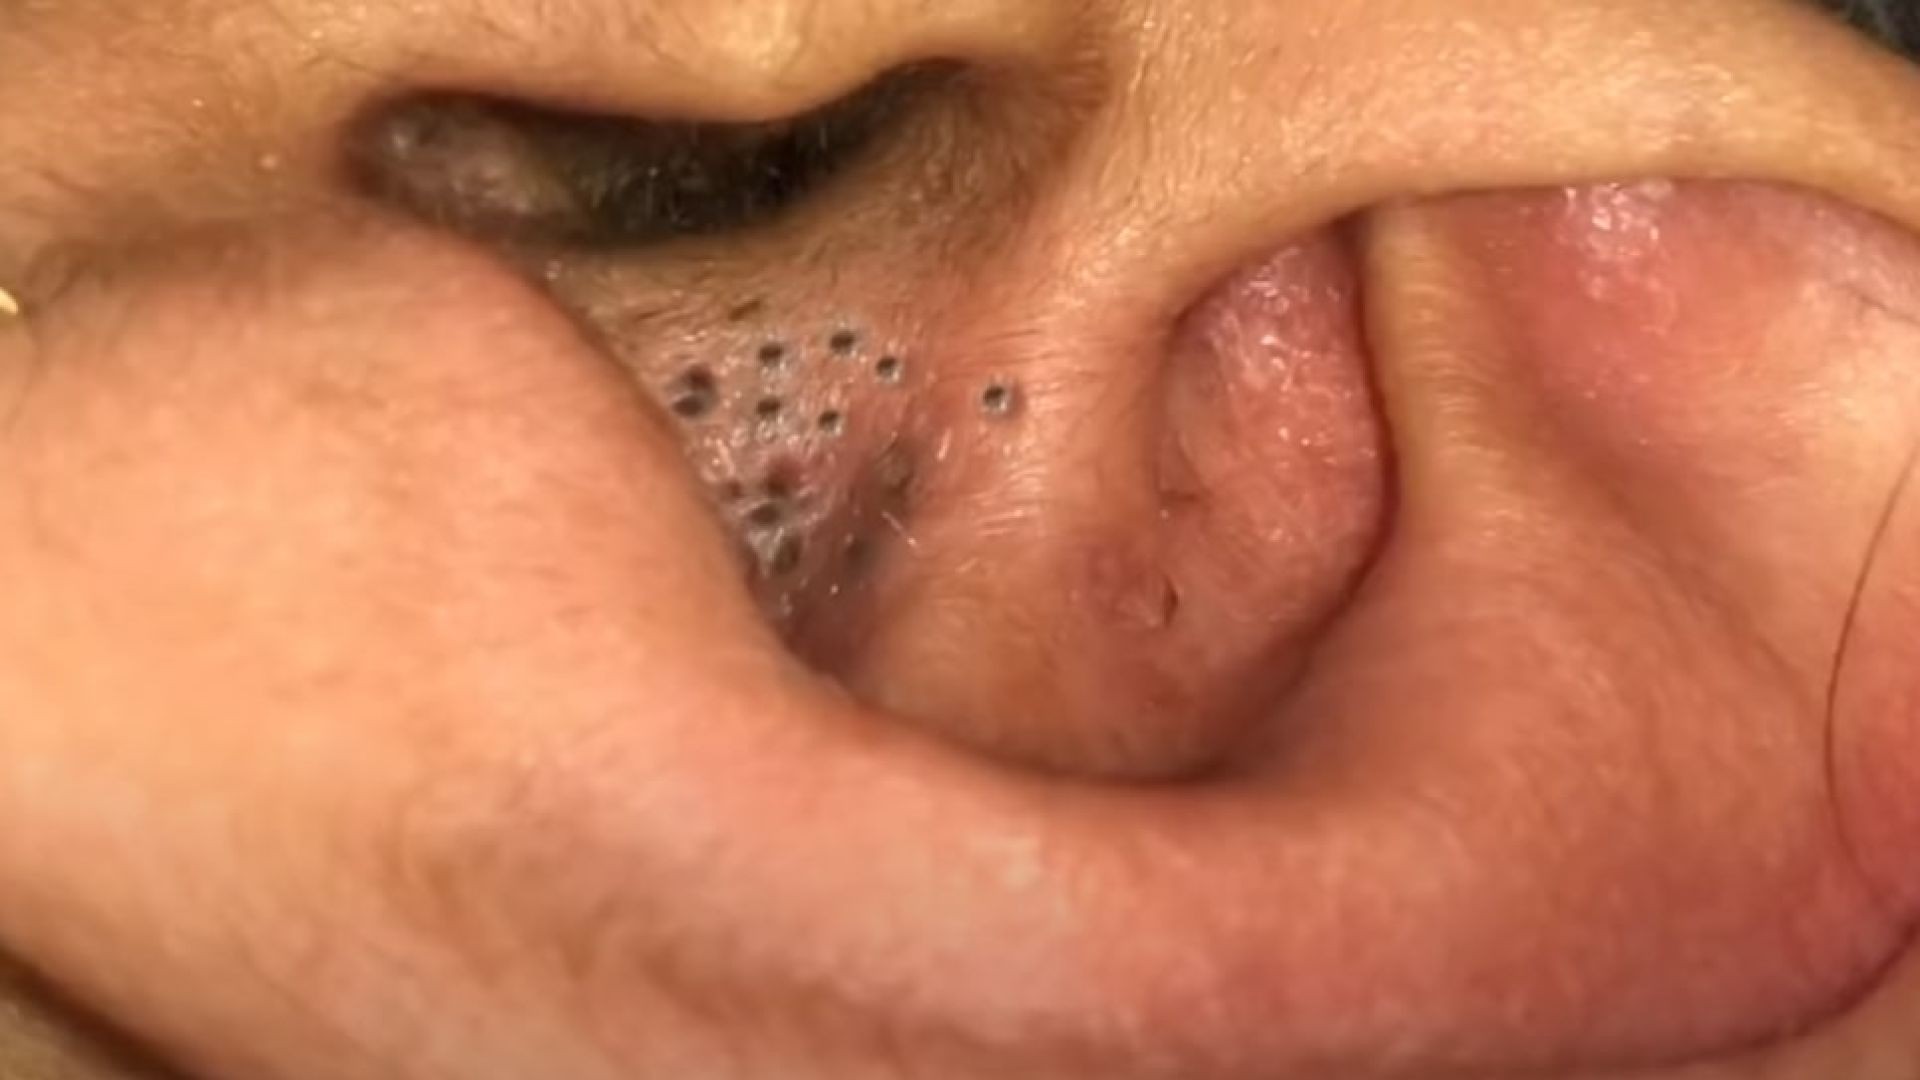 Popping Big Blackheads in ear (What Causes Them?)